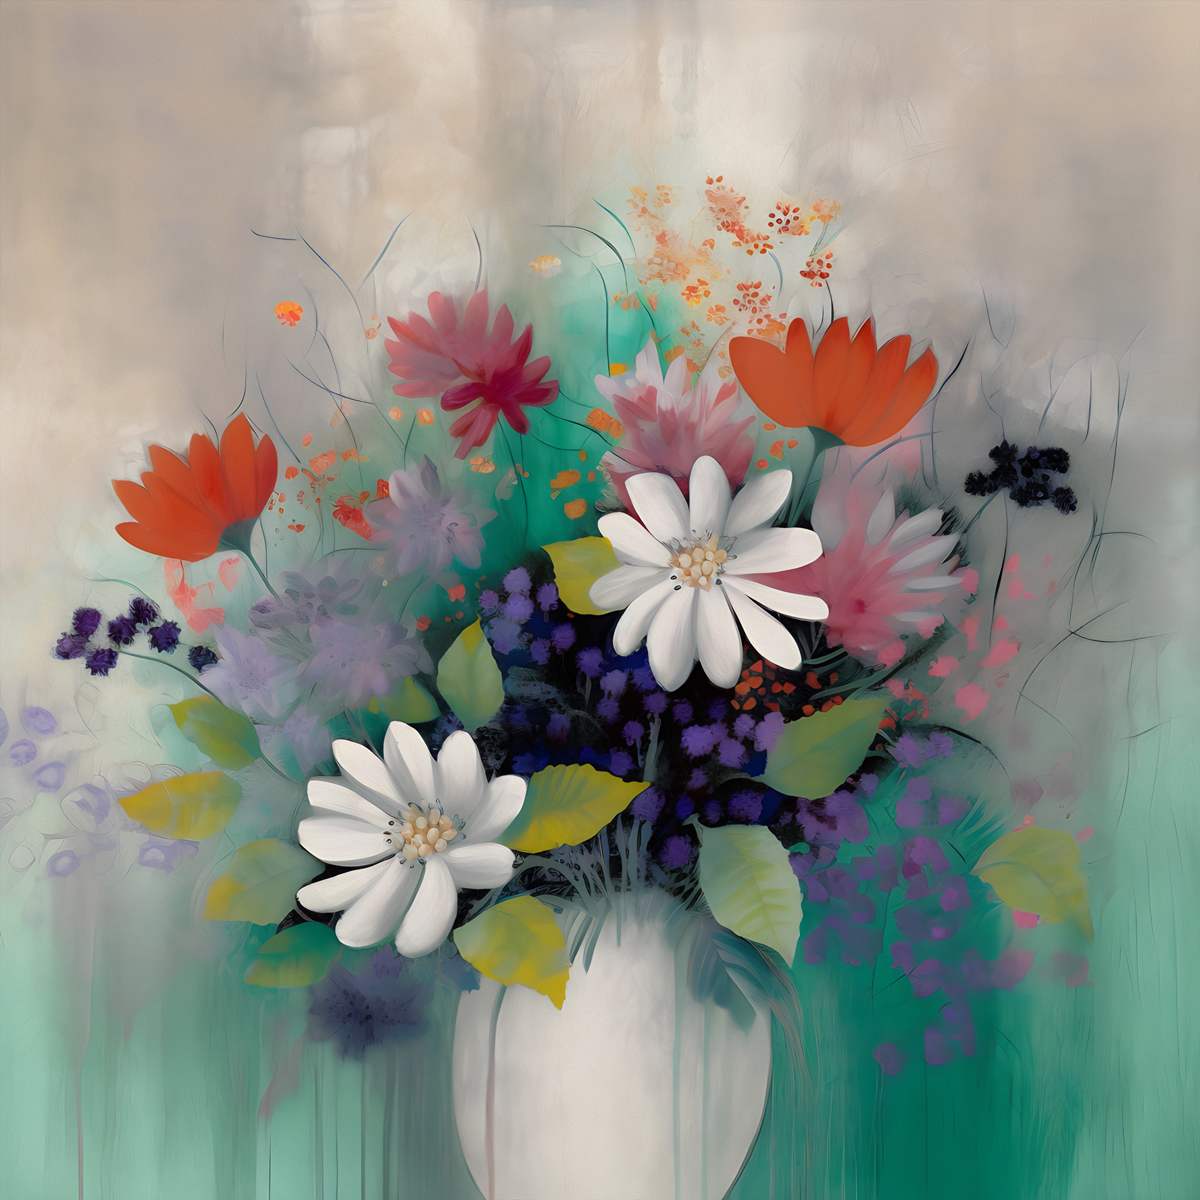  Enchanting Daisies: 'Vase with White Daisies' Collection - Art Print on Canvas. Artemyst